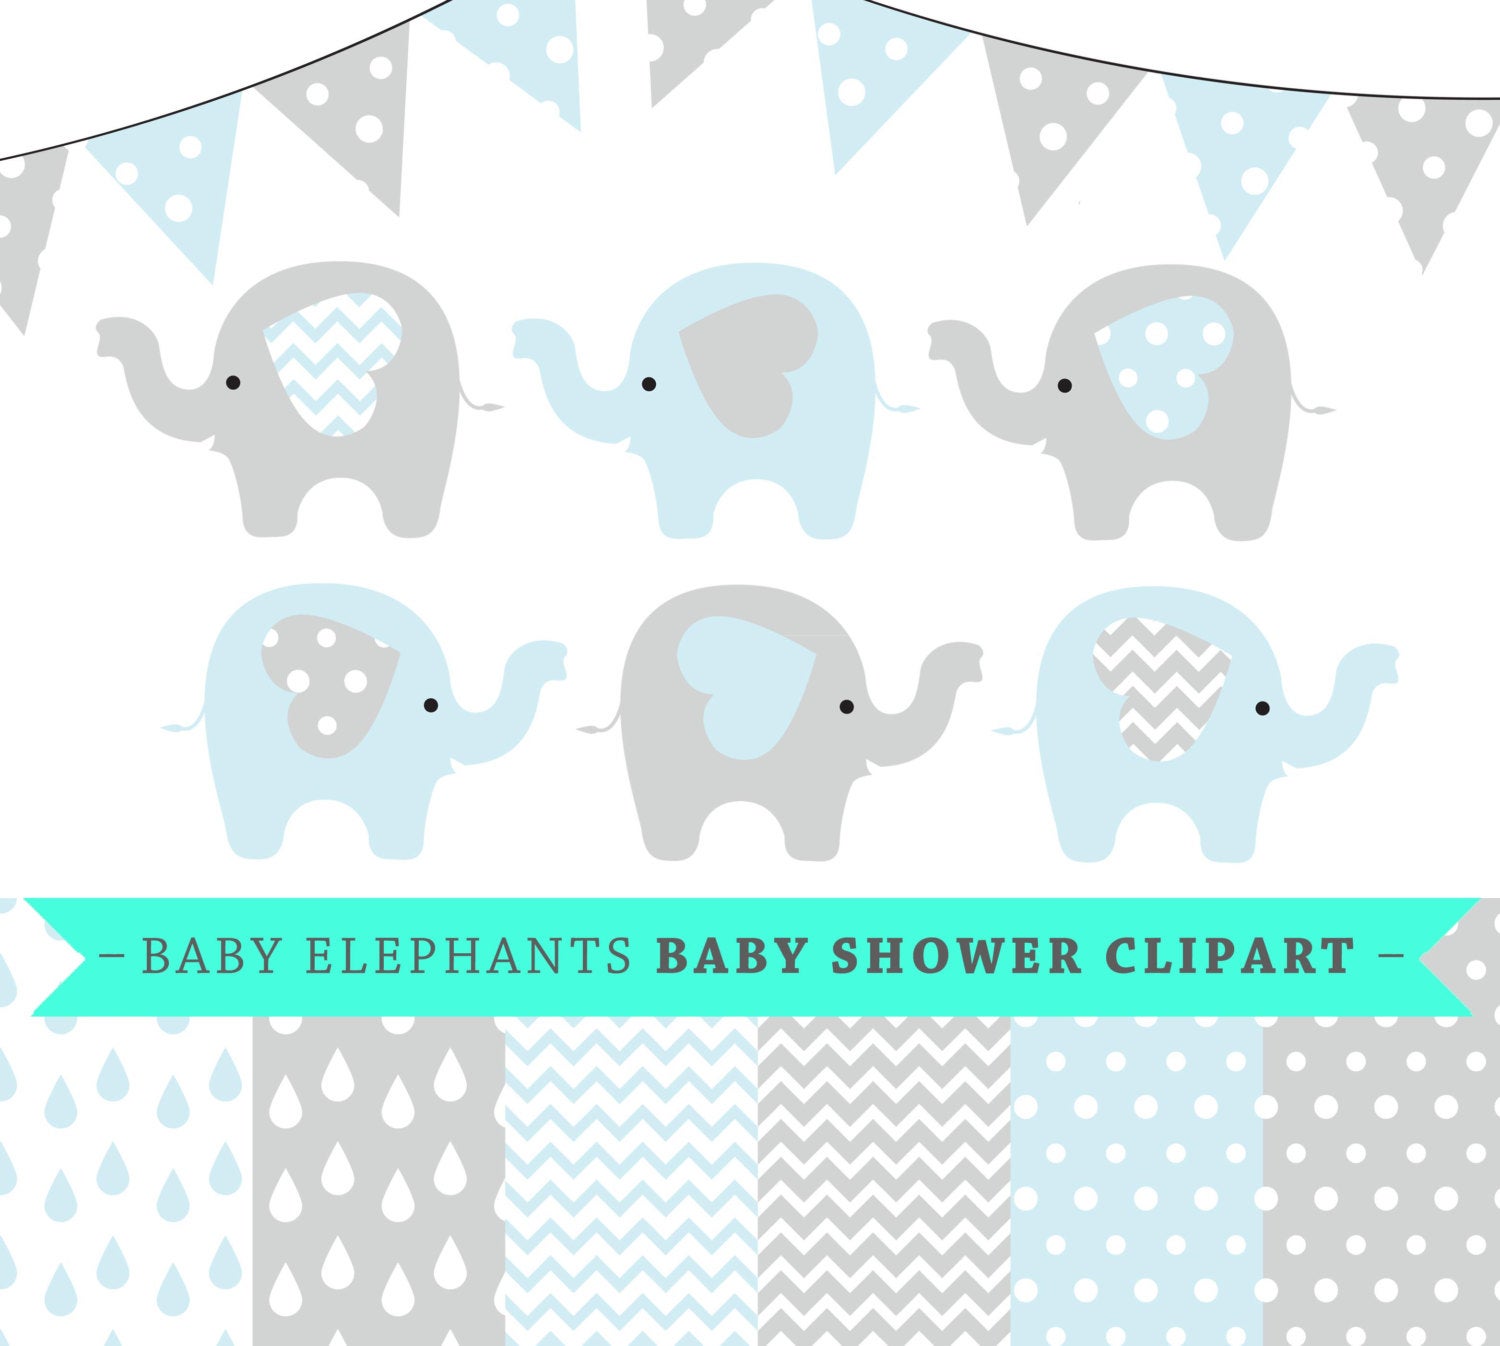 Premium vector blue and. Elephants clipart baby shower